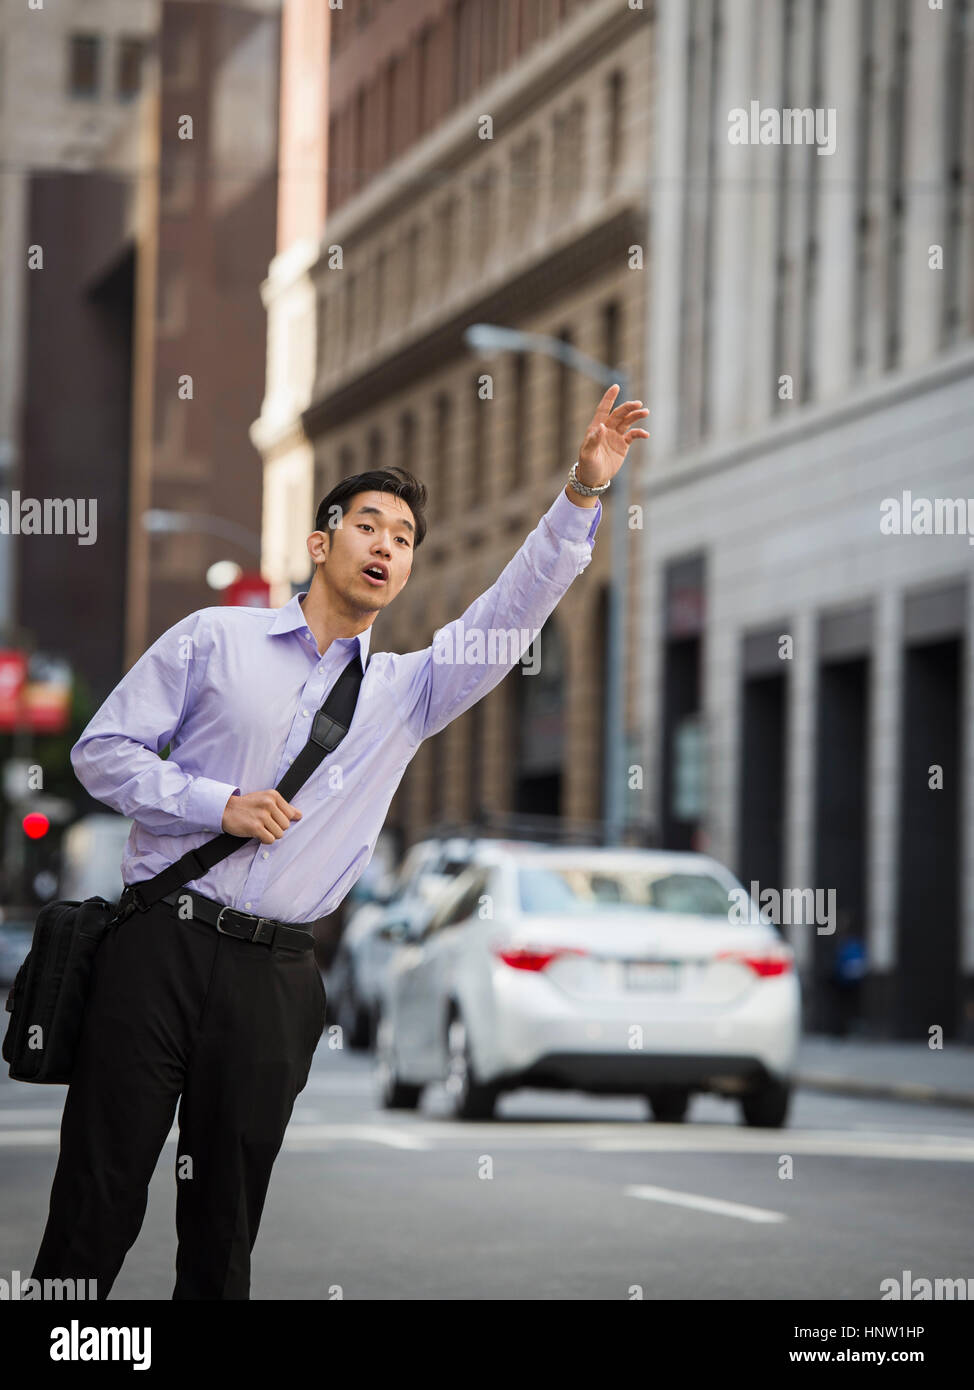 Chinese businessman hailing taxi in city Stock Photo